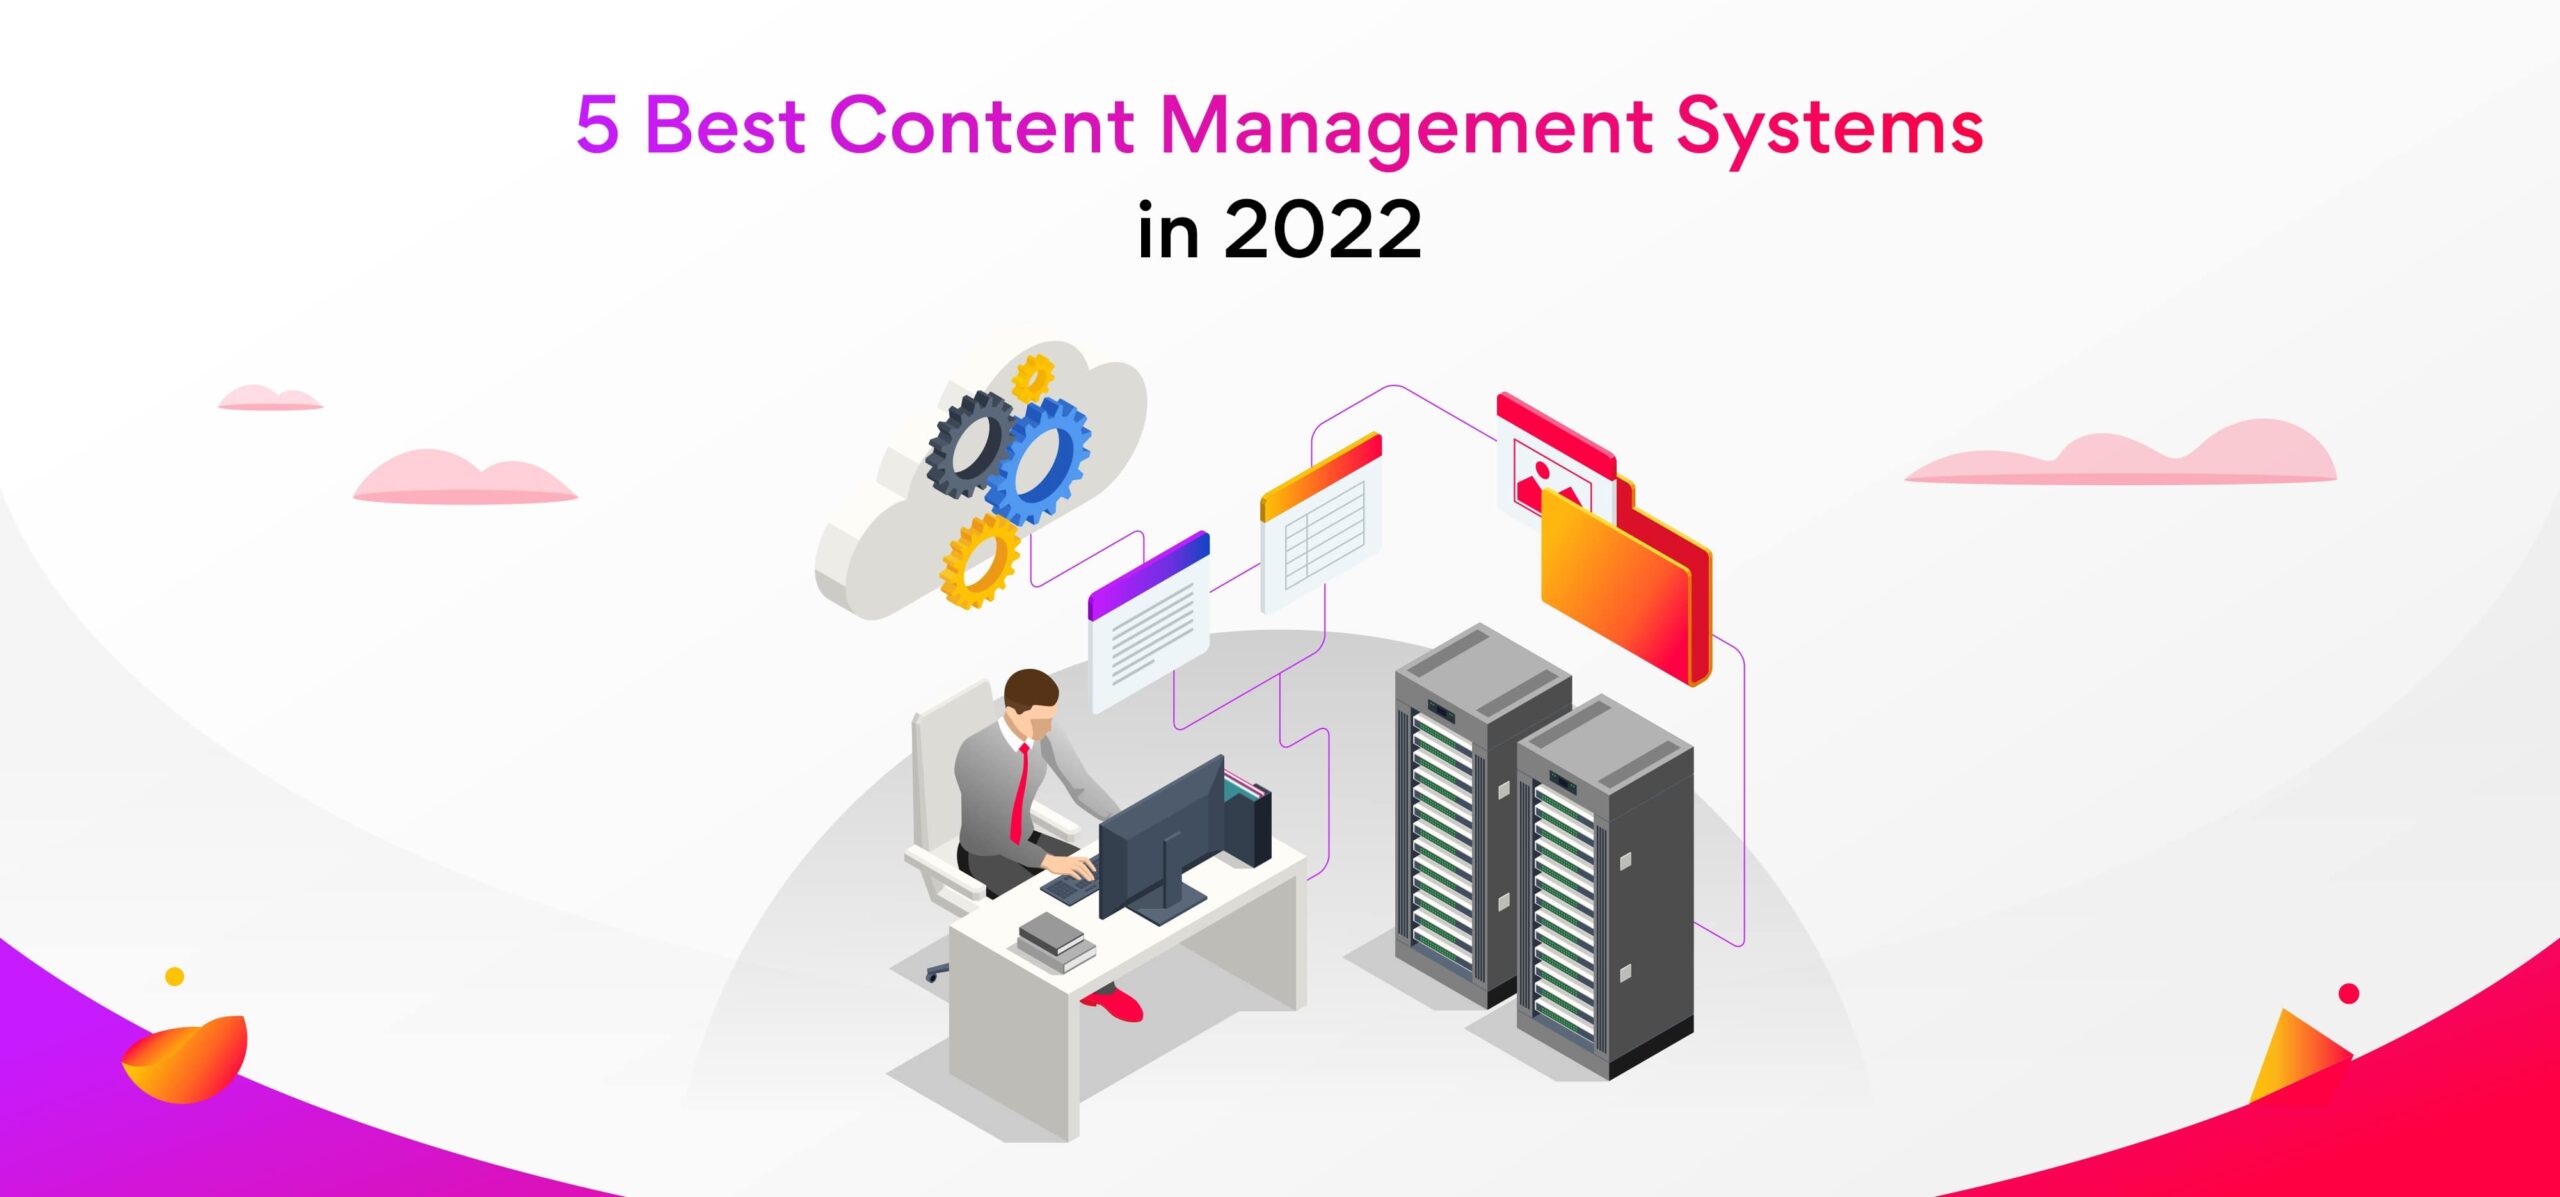 Popular Content Management Systems